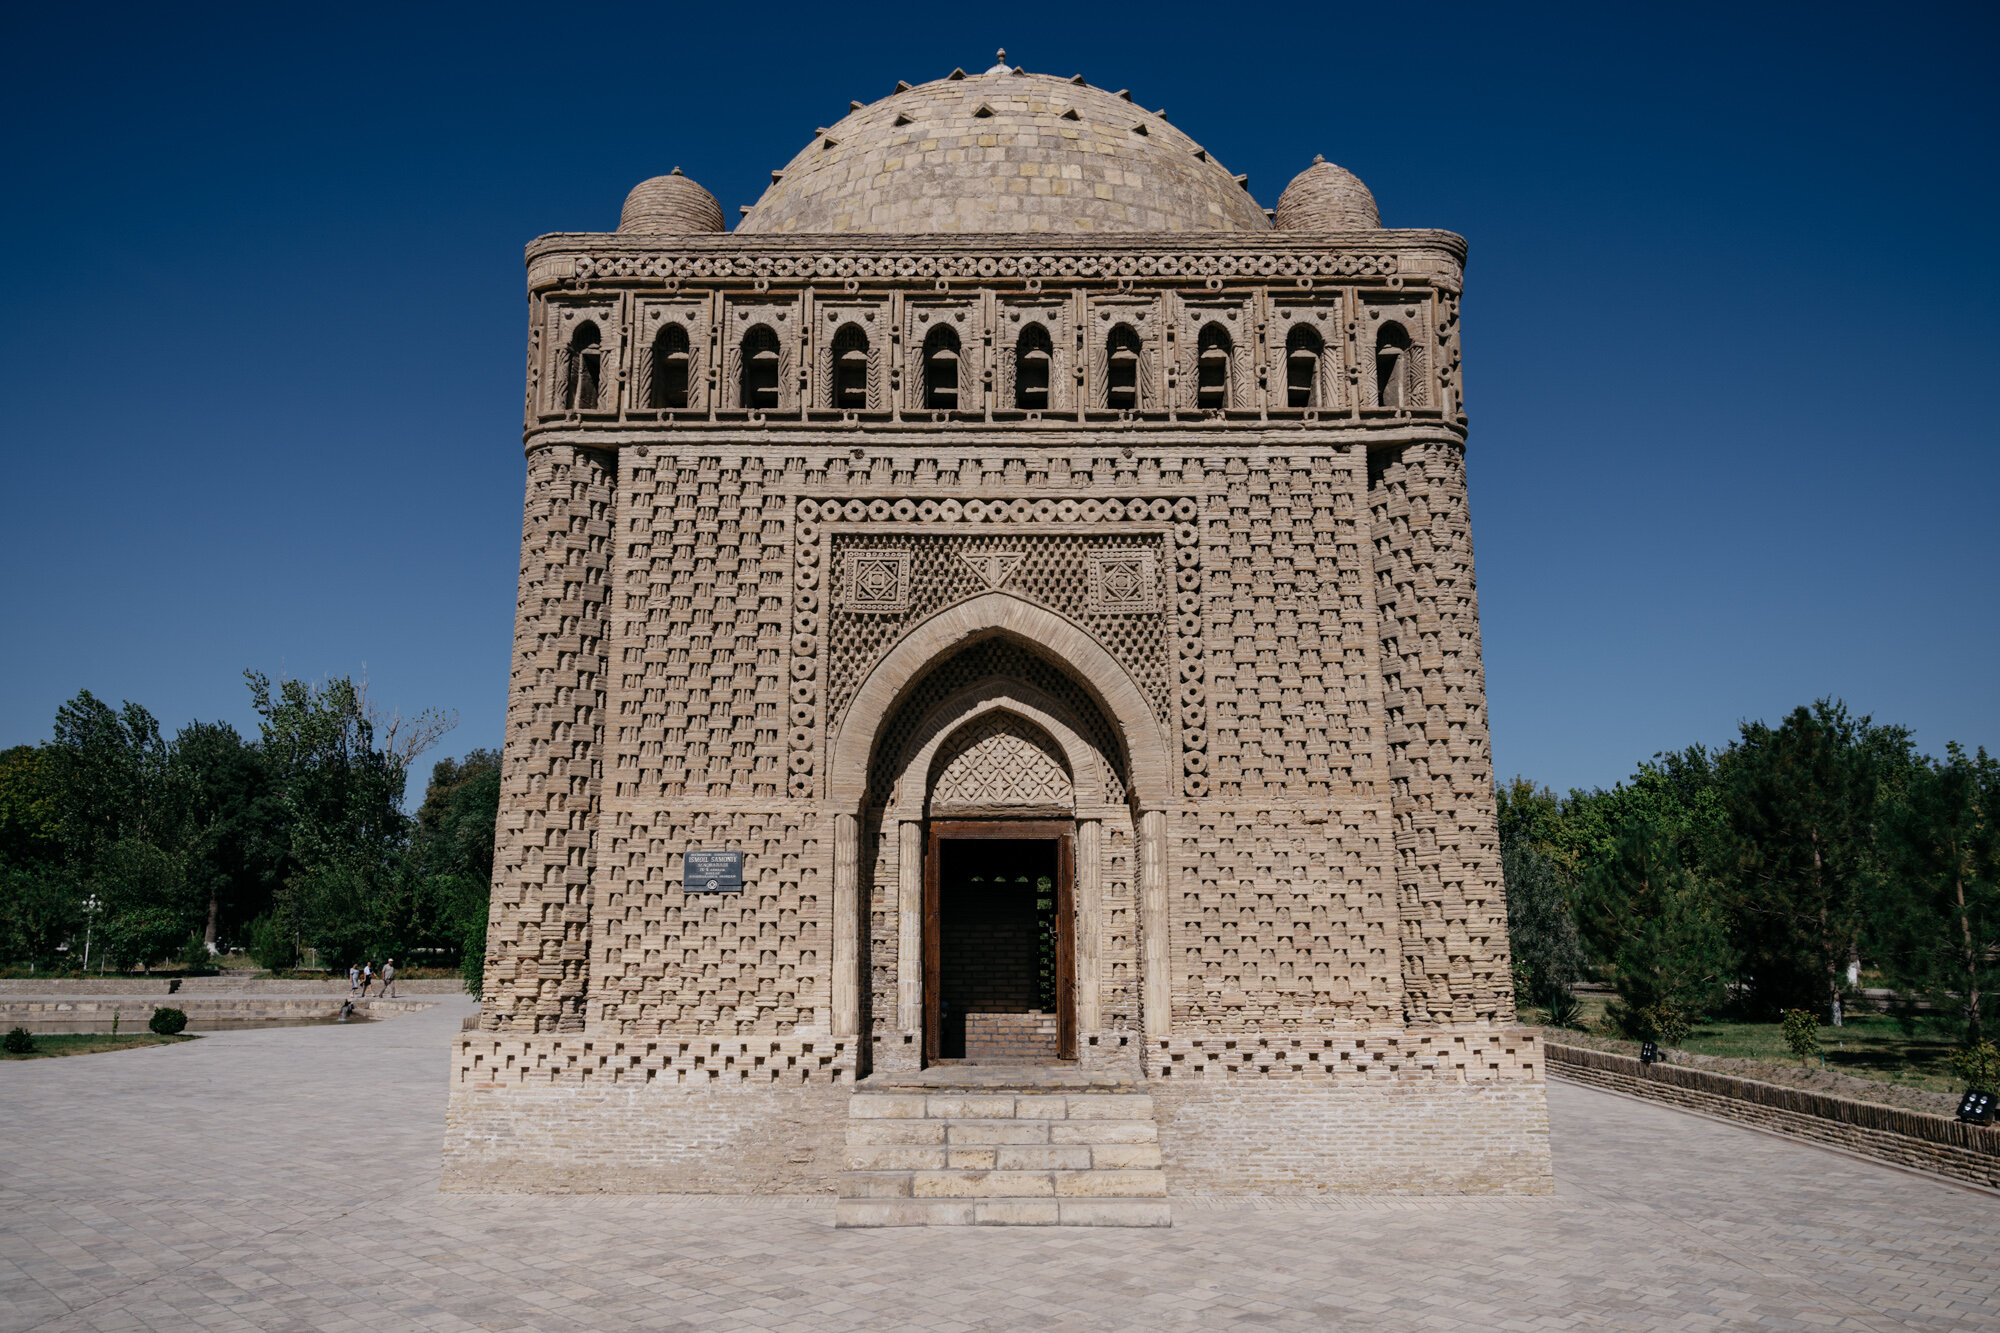  The mausoleum is considered one of the iconic examples of the early Islamic architecture 